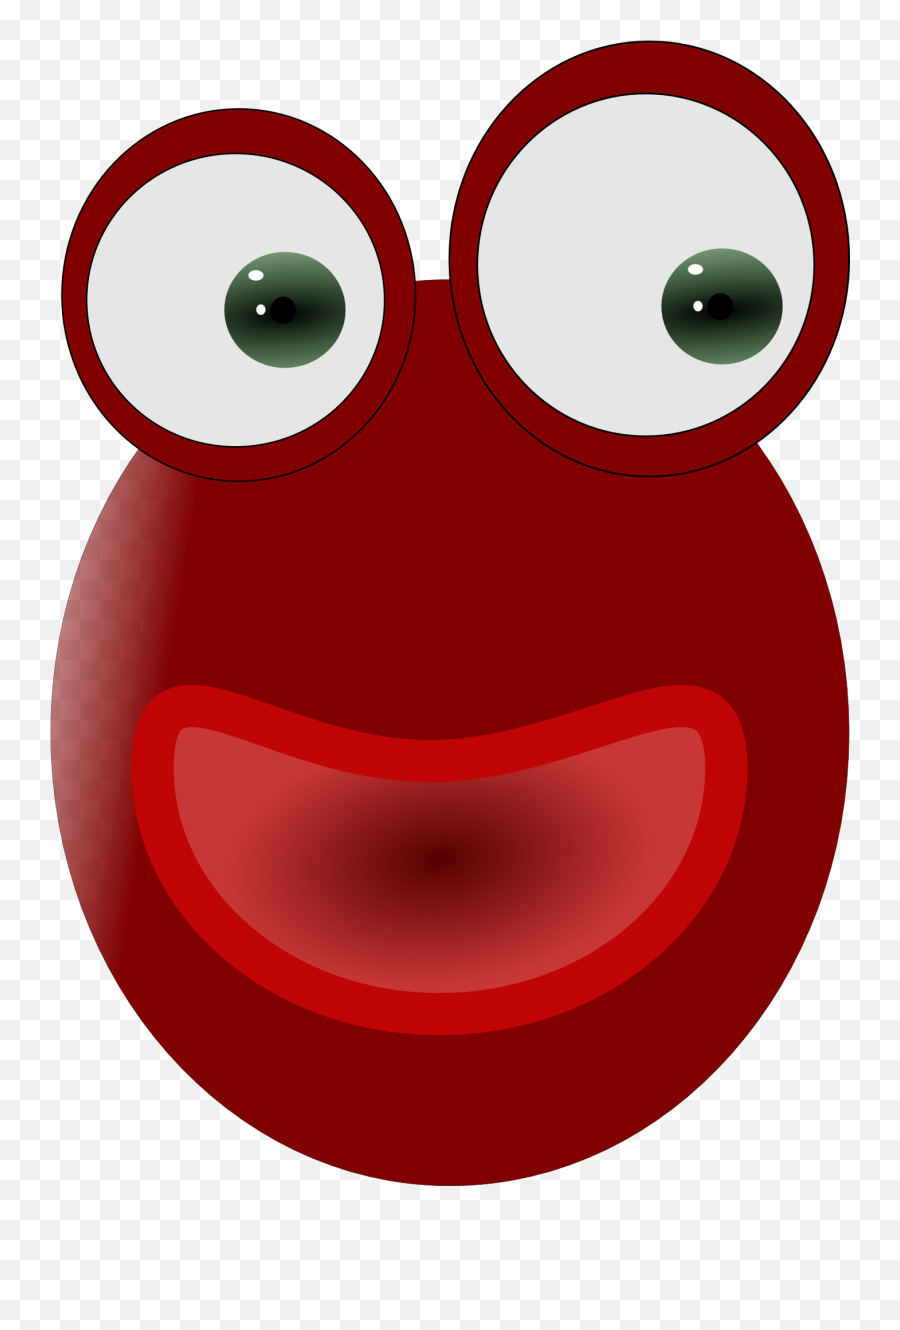 Red Frogs Face With Big Eyes And Happy Smile - Rosto Sapo Vermelho Emoji,Frog Emoticons